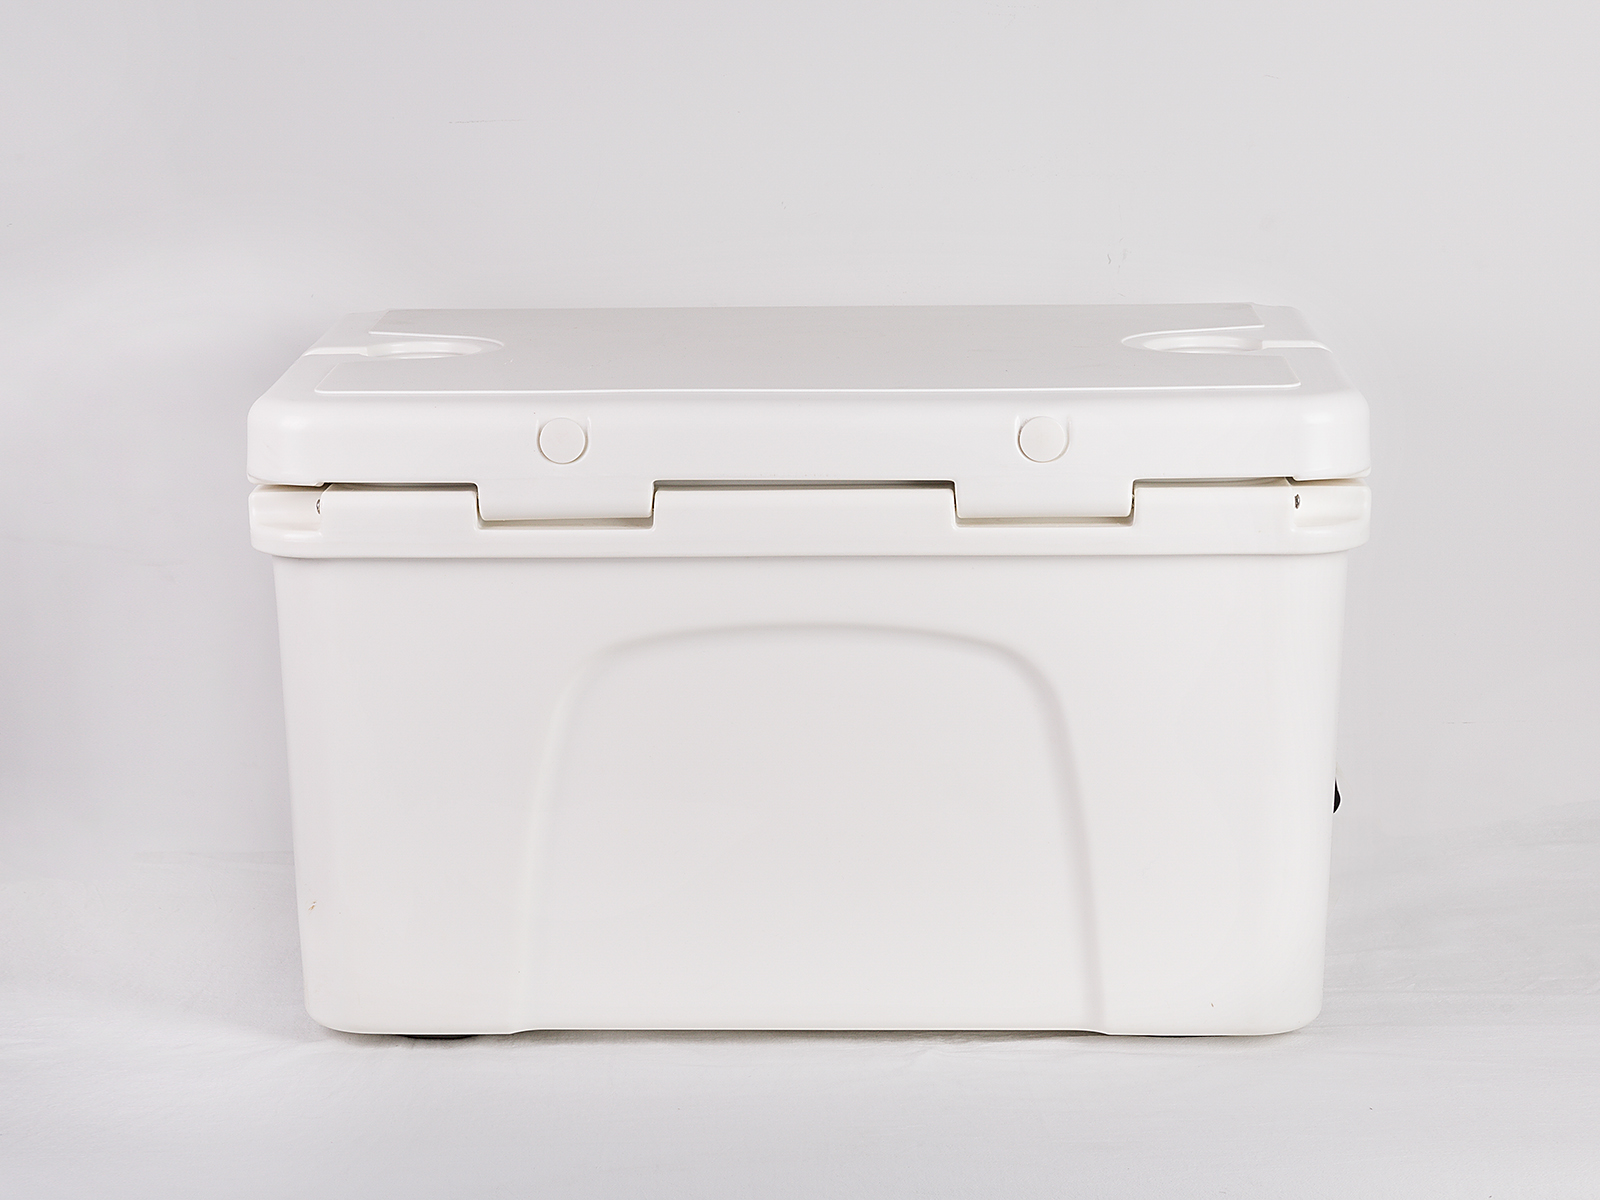 Snowball Coolers for Camping, Fishing, Hunting, BBQs & Outdoor Activities, White, 69QT(65L)